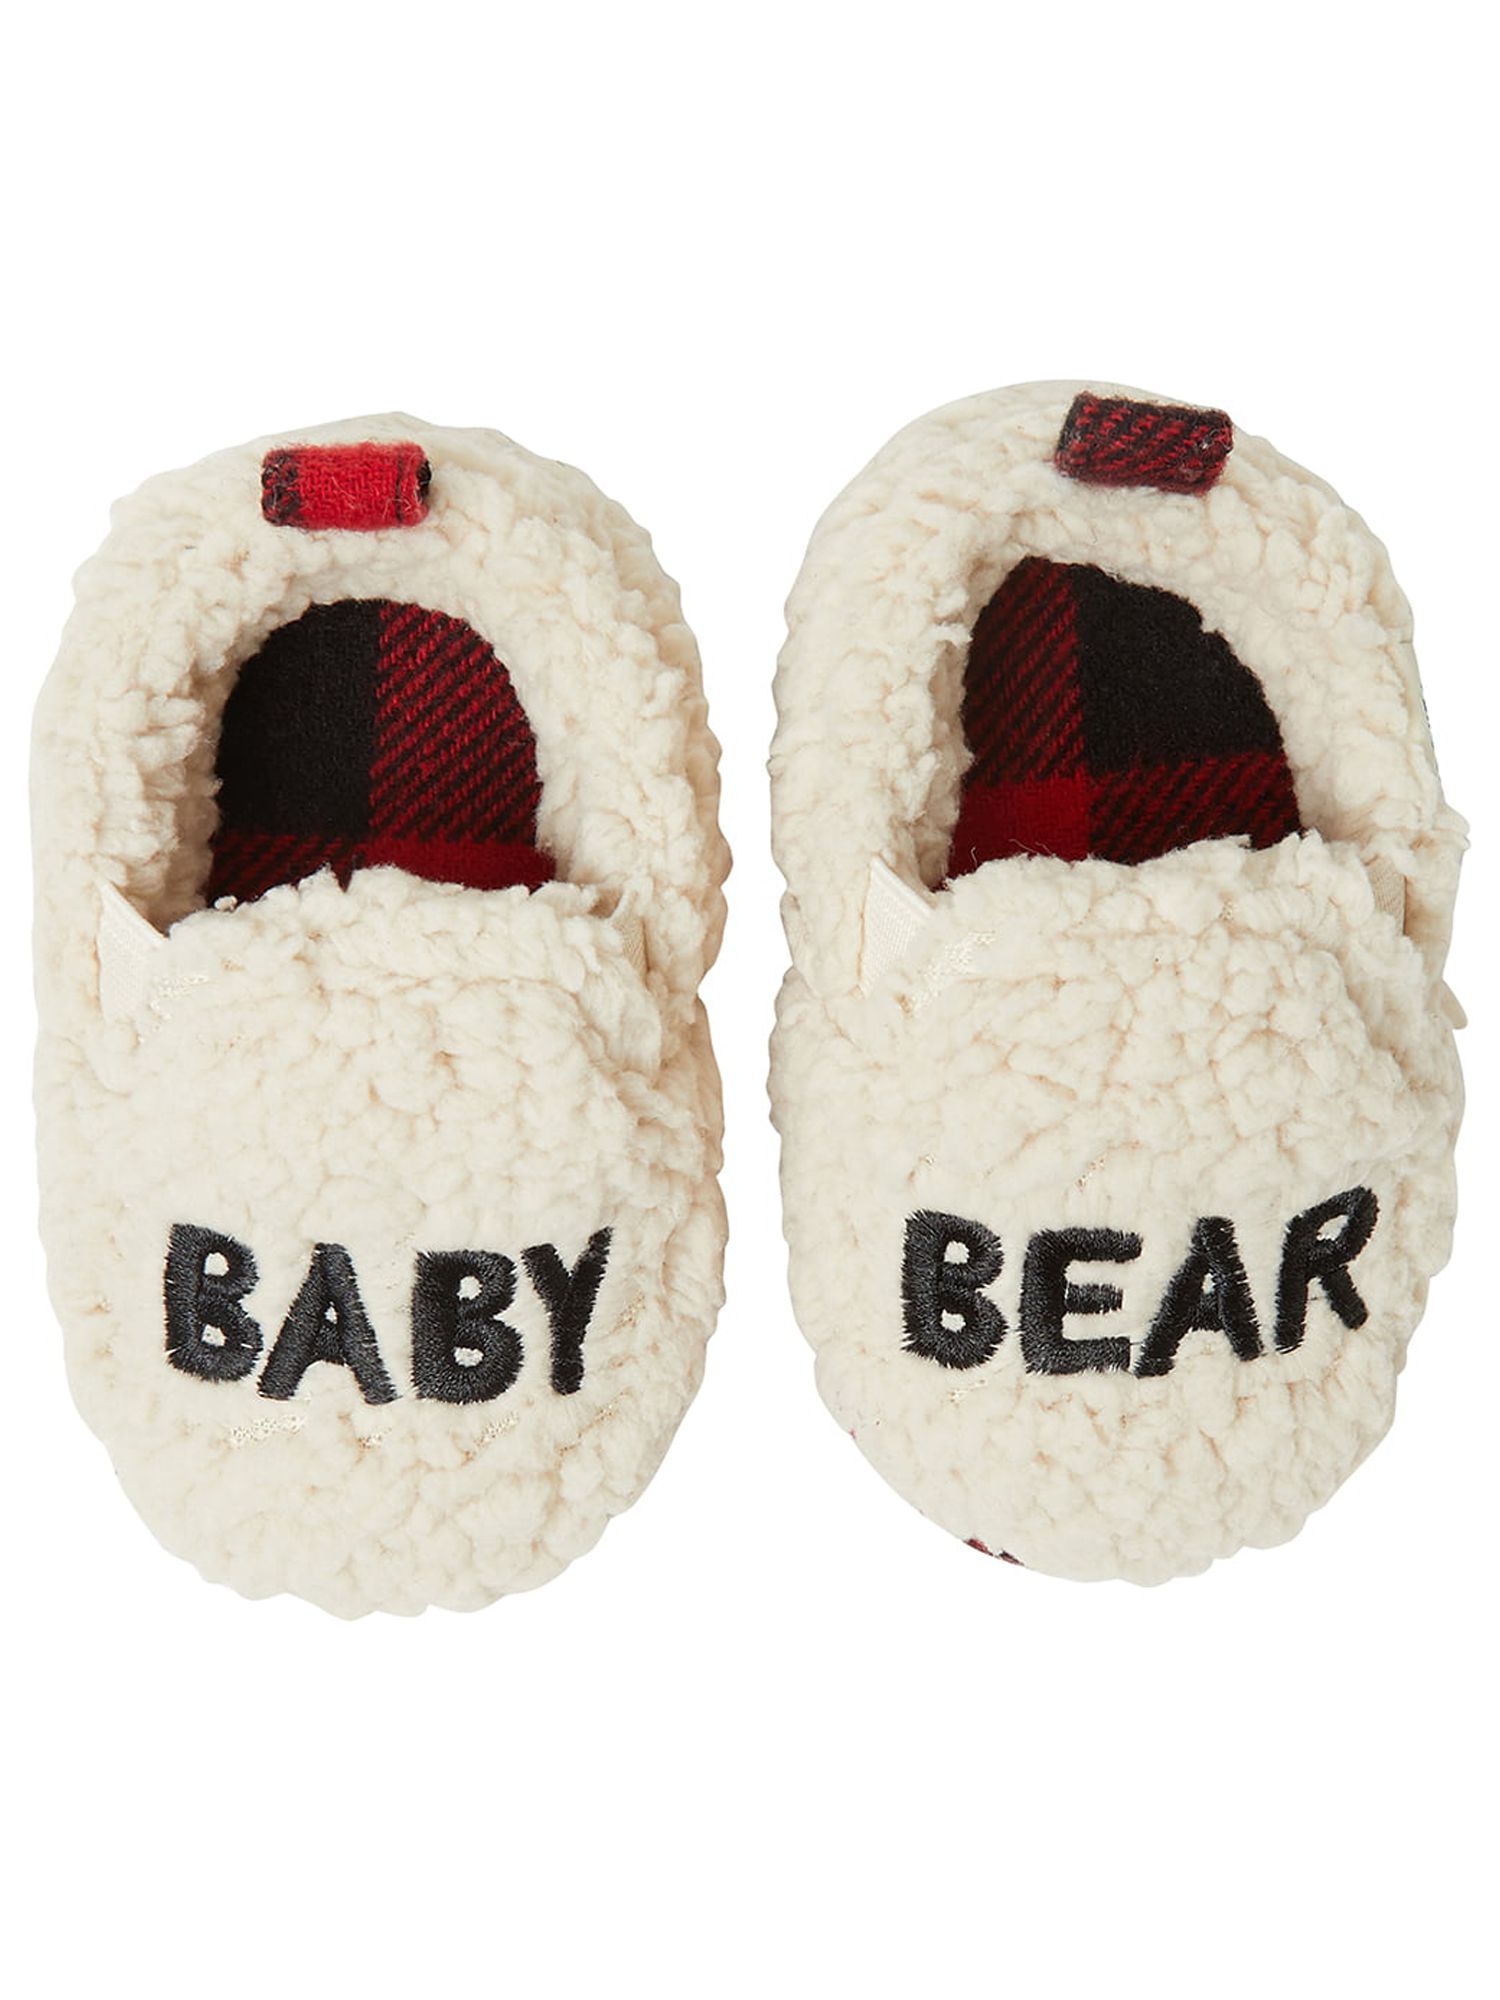 DF by Dearfoams Baby Bear Closed Back slippers - image 1 of 6